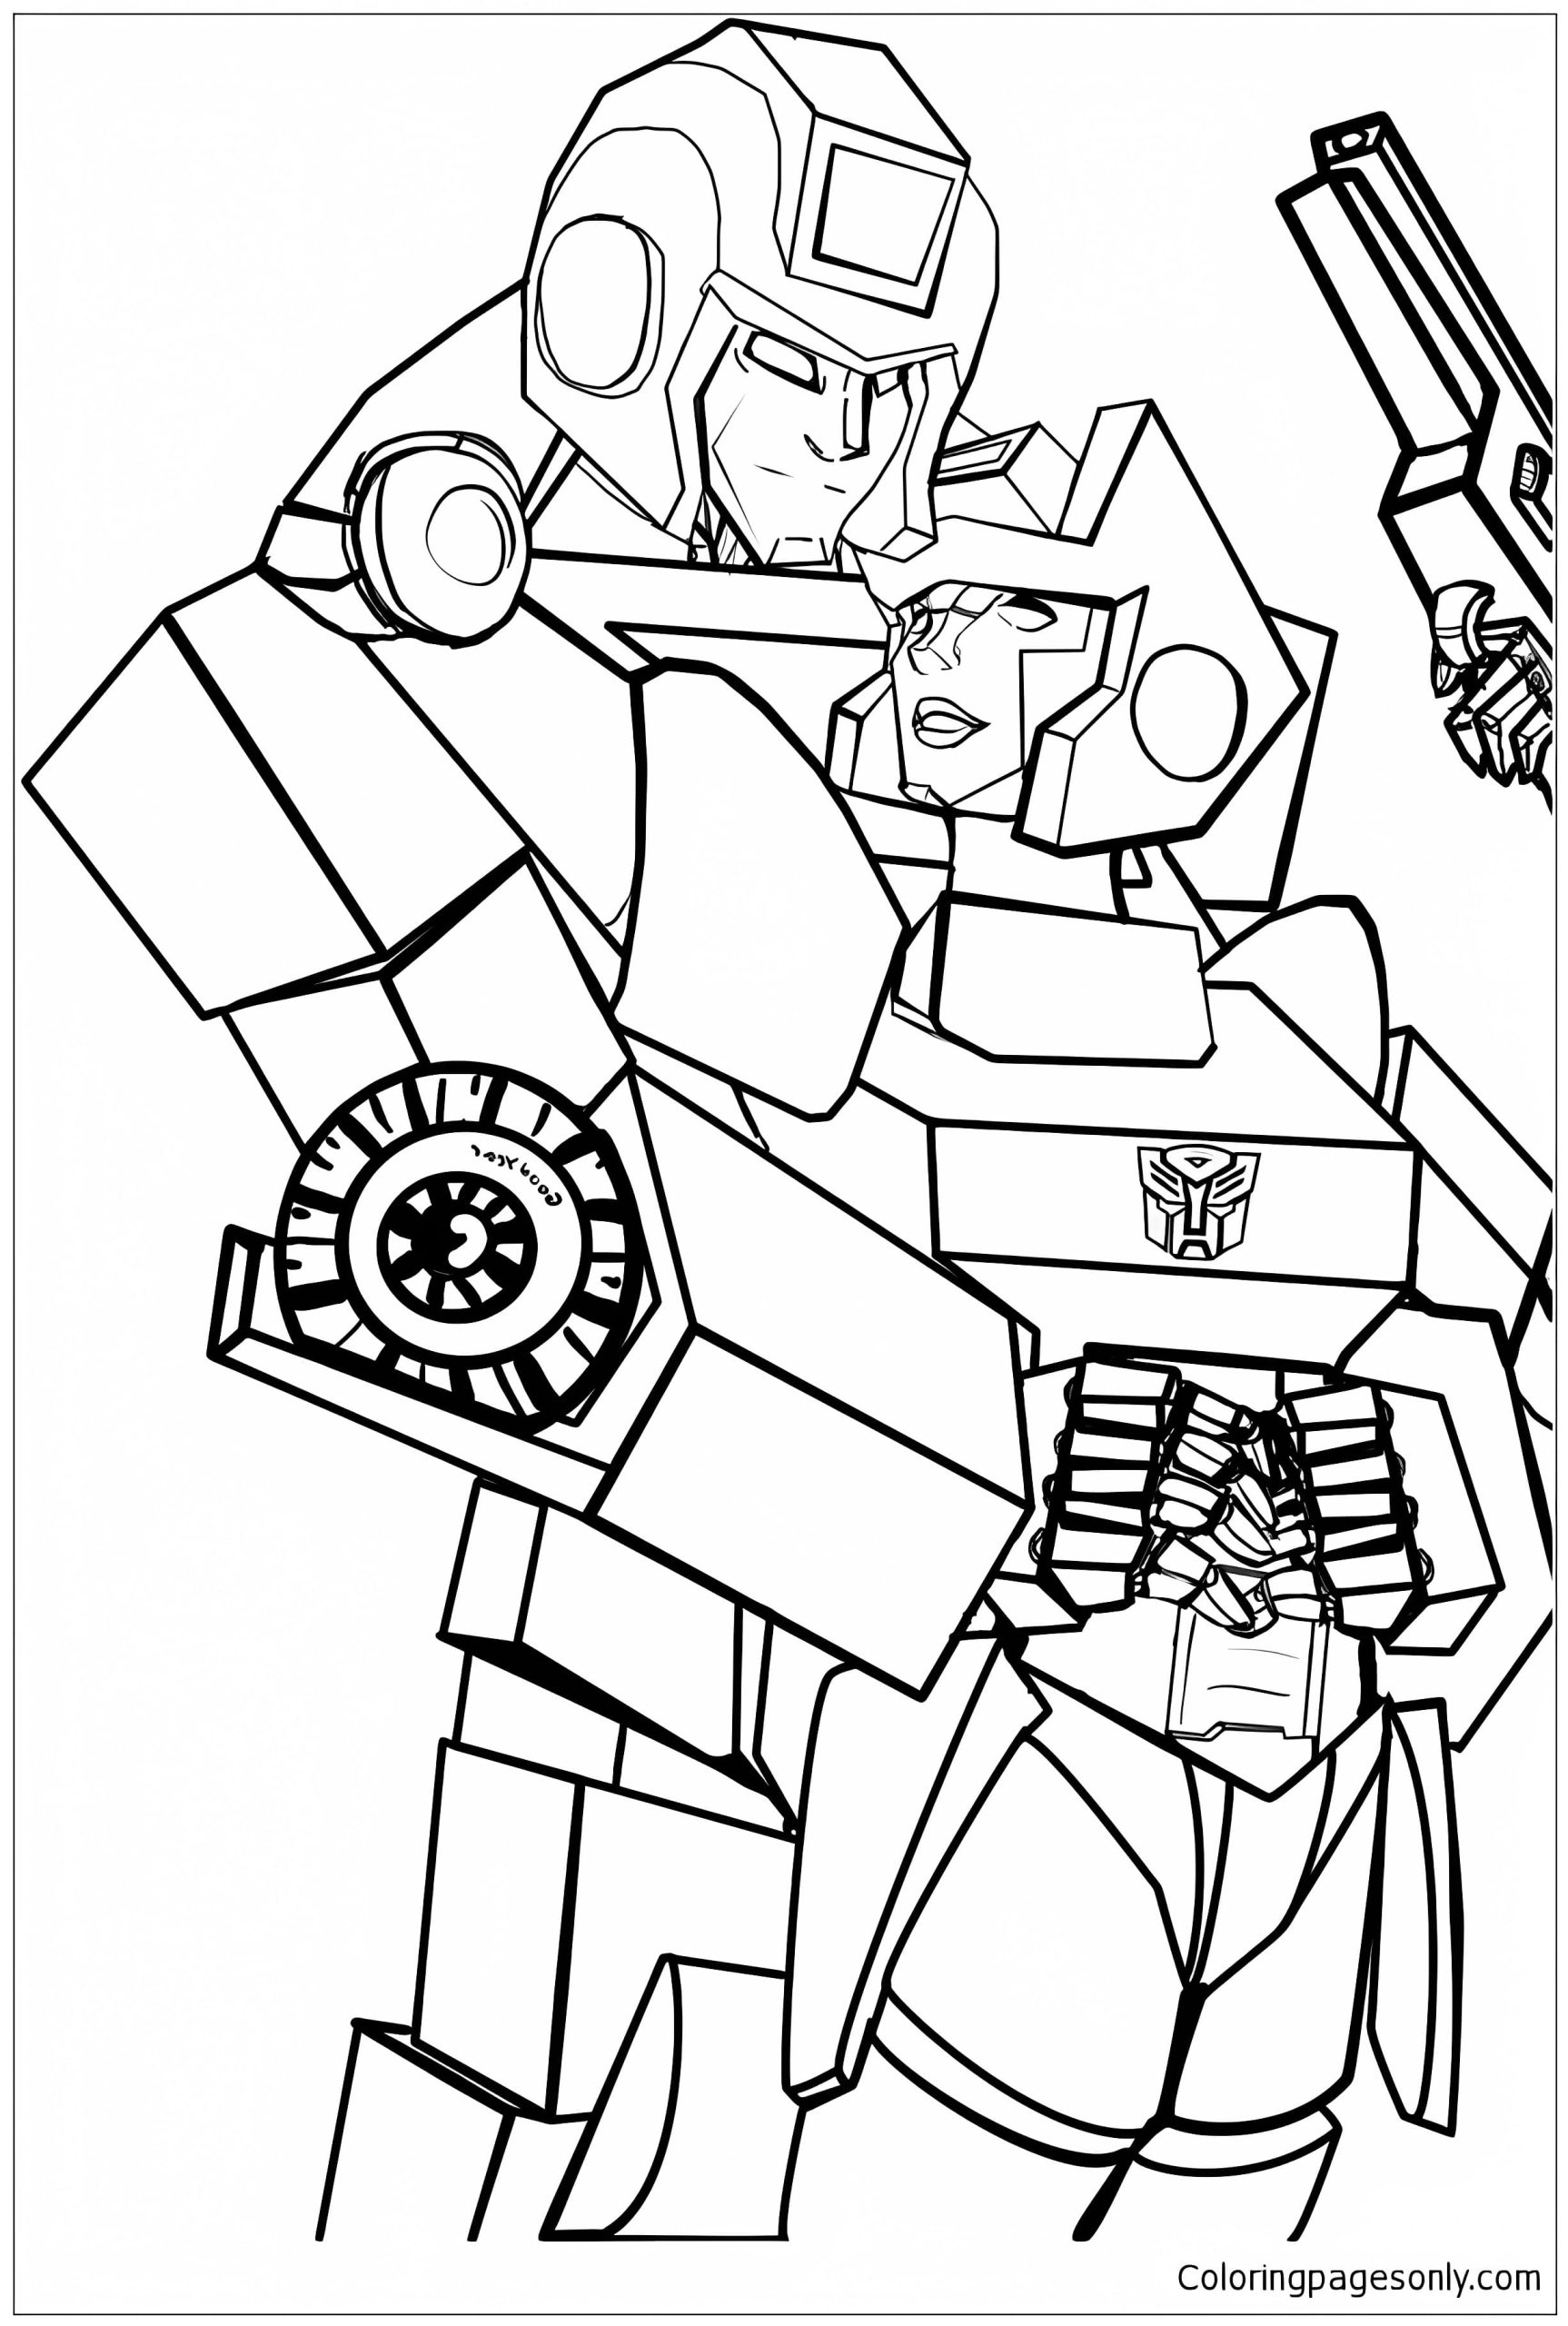 Awesome Ironhide Of Transformers Coloring Page